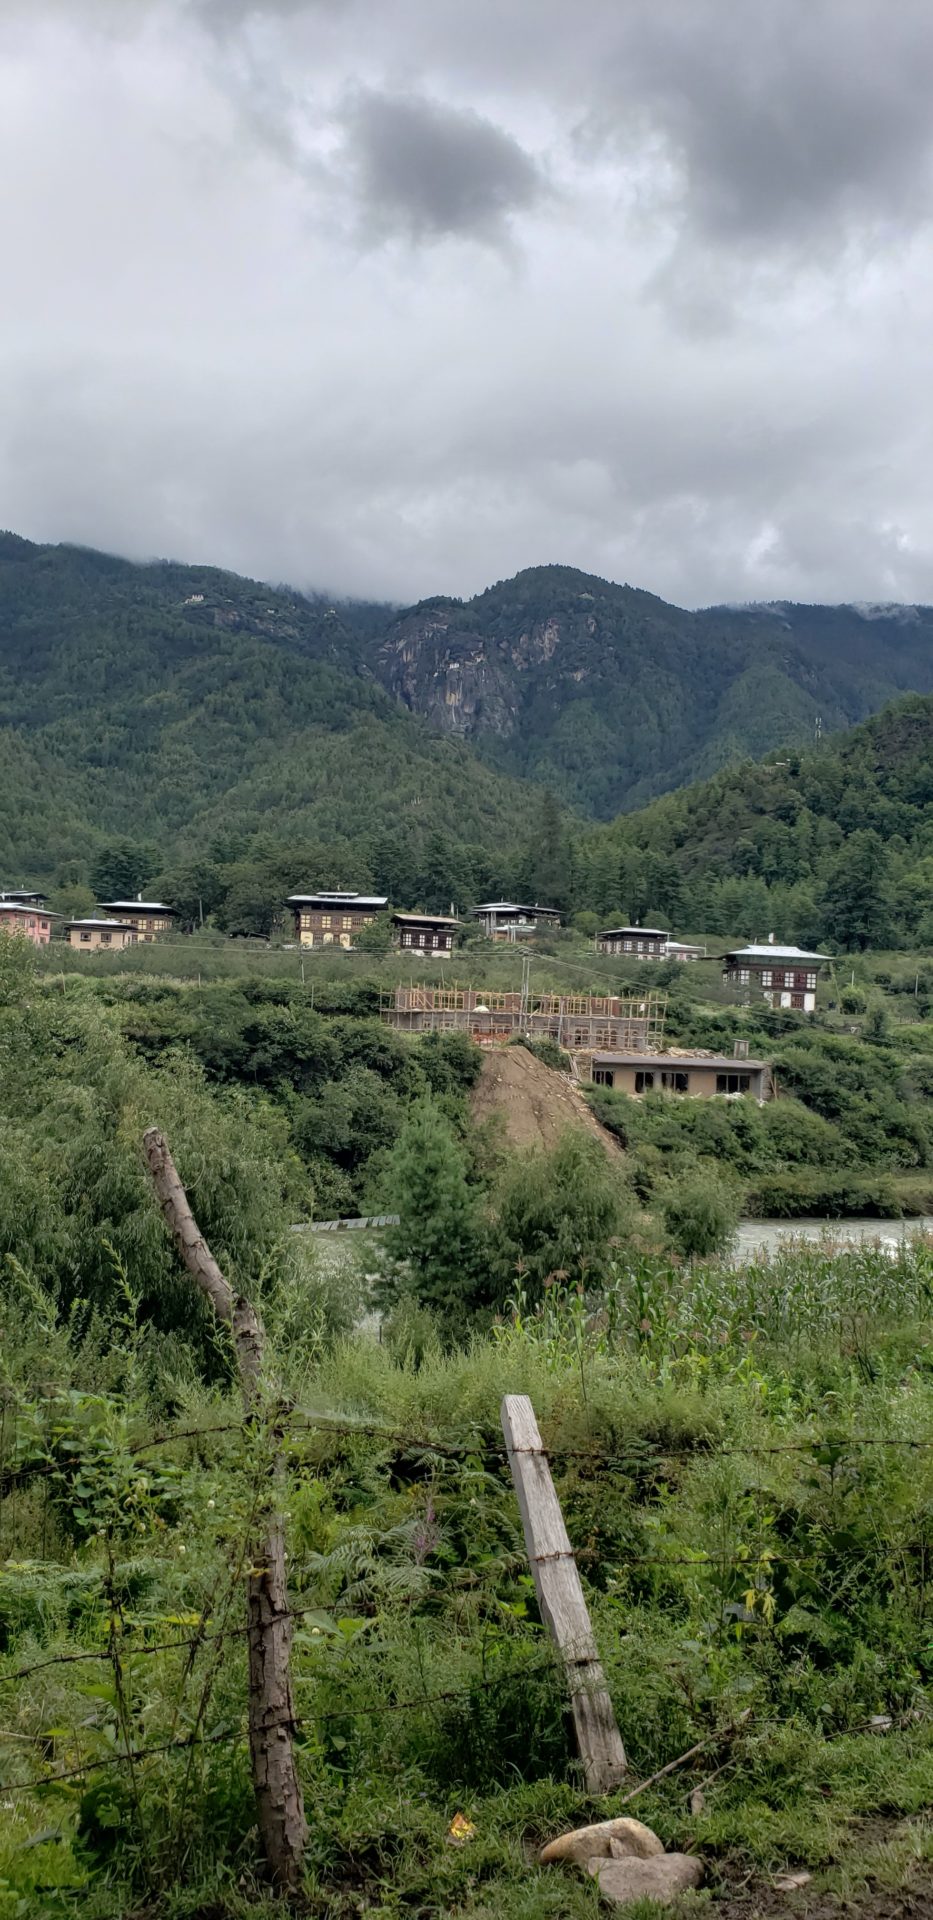 a group of houses on a hill with trees and mountains in the background